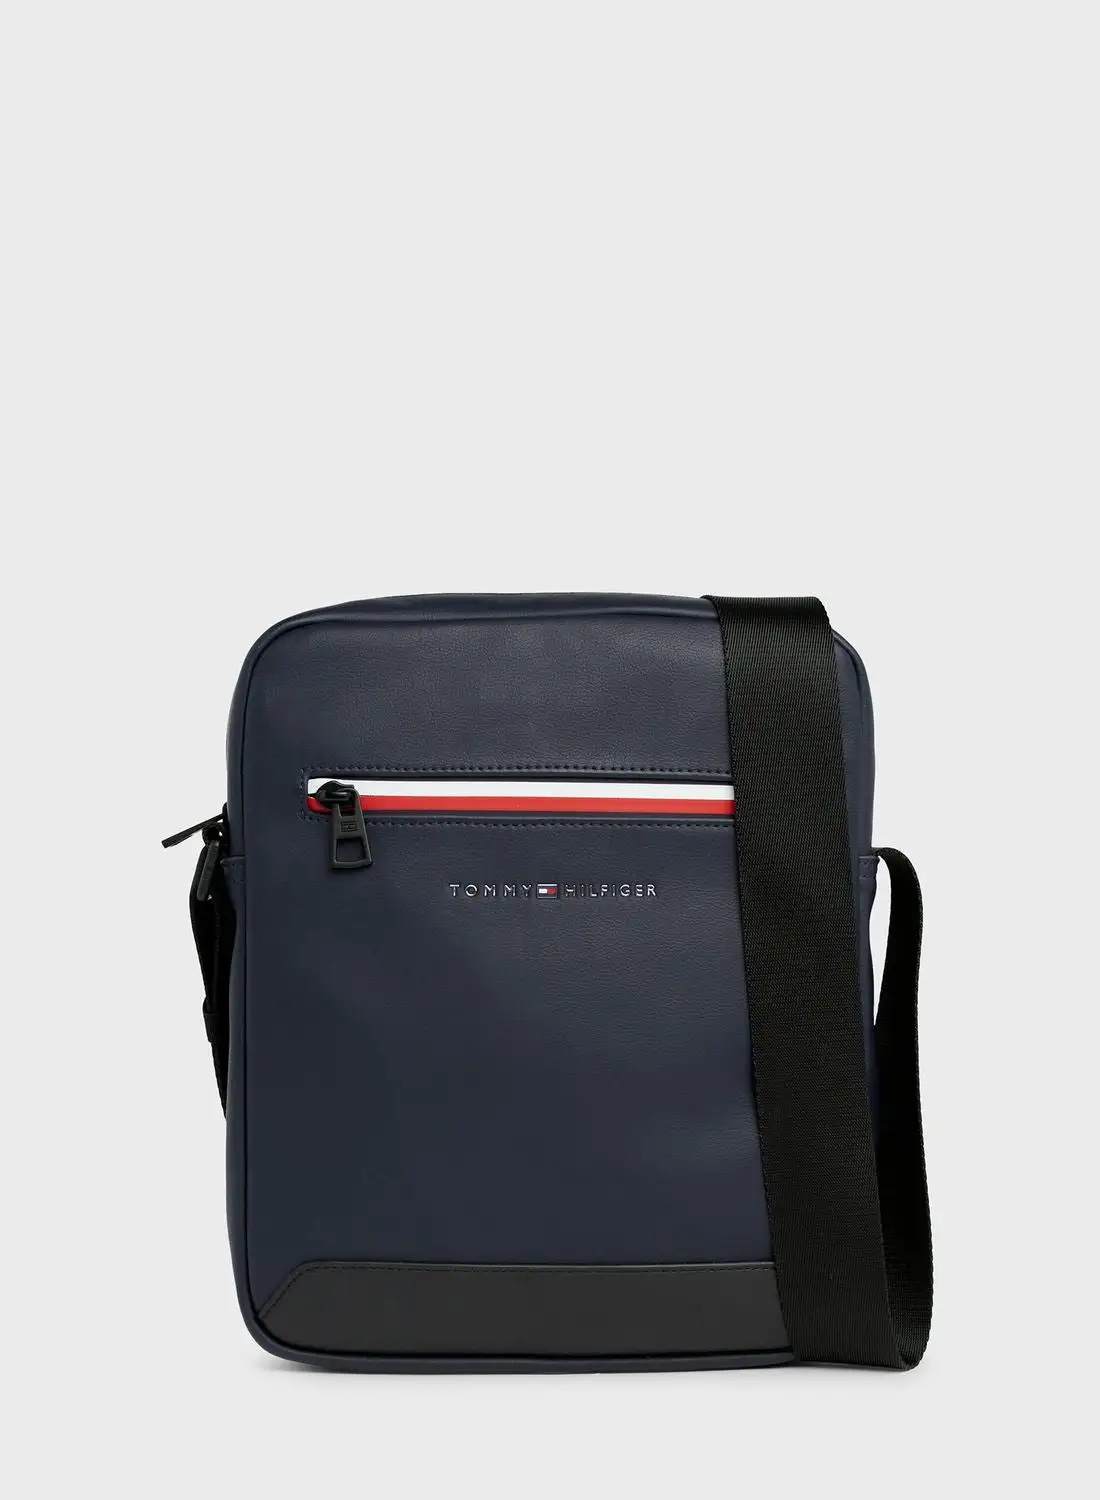 TOMMY HILFIGER Toiletry Bags